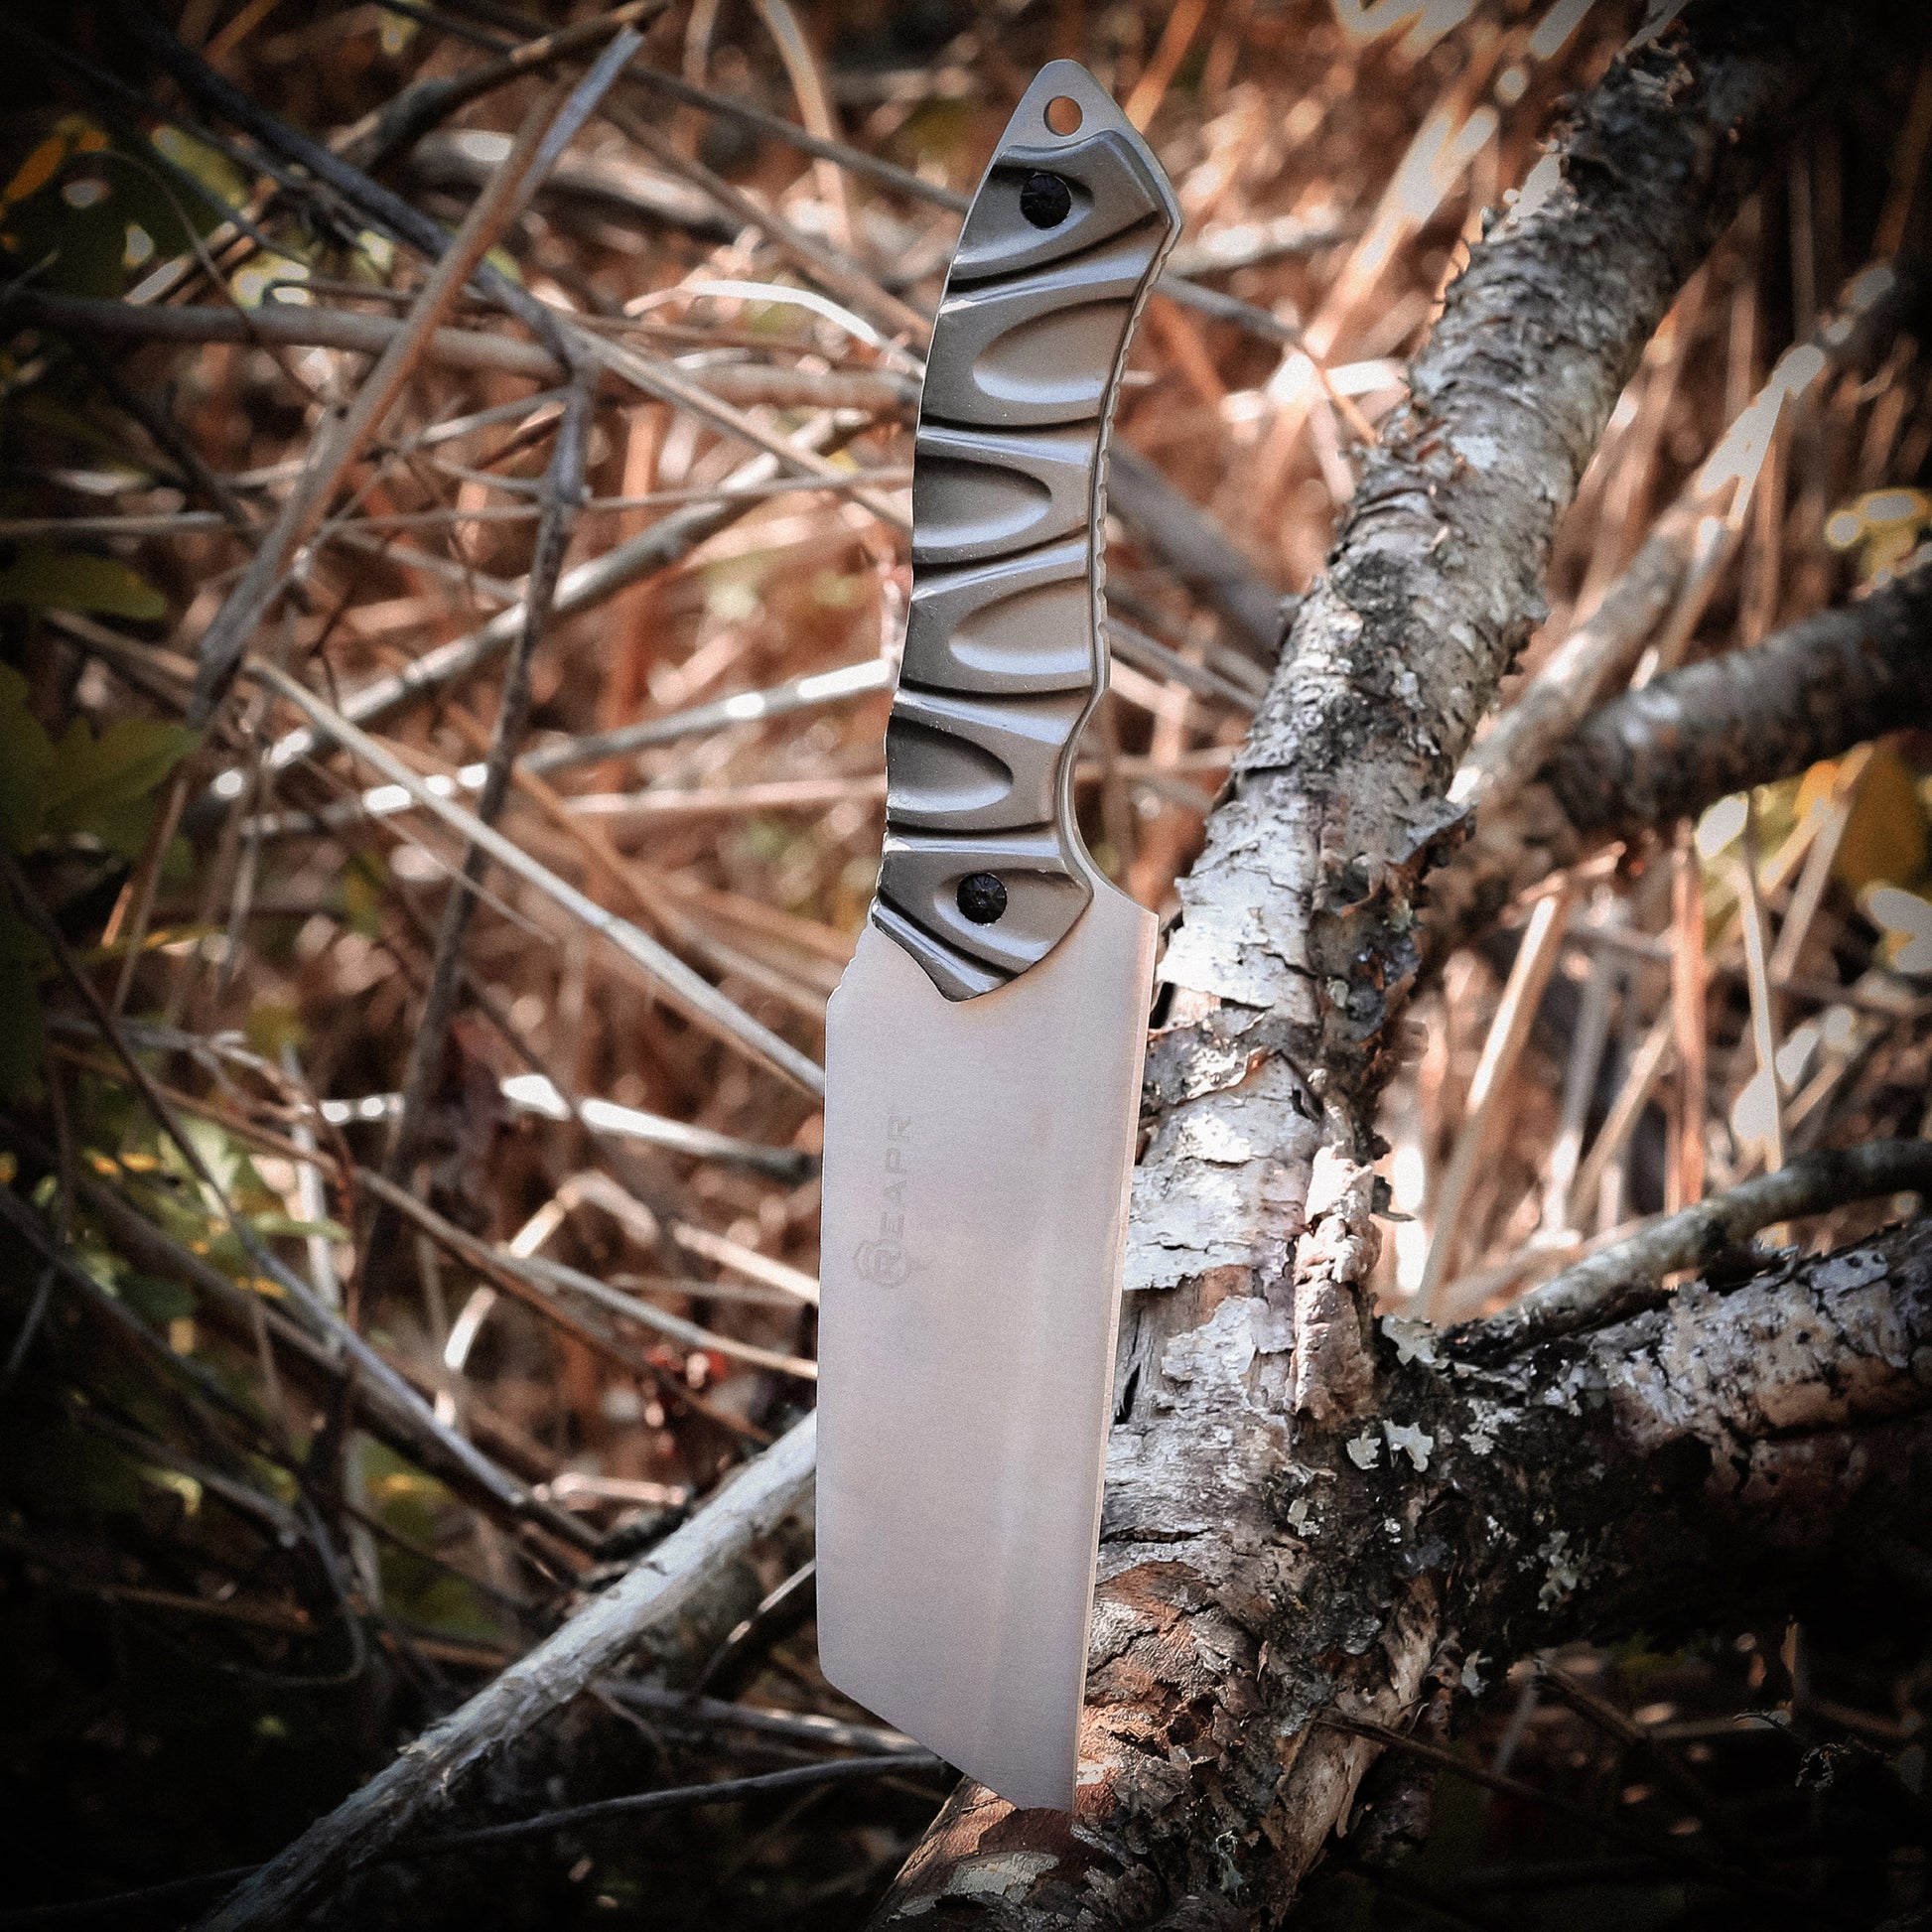 REAPR 11012 JAMR Knife is the ultimate in versatile, tactical fixed-blade knives.